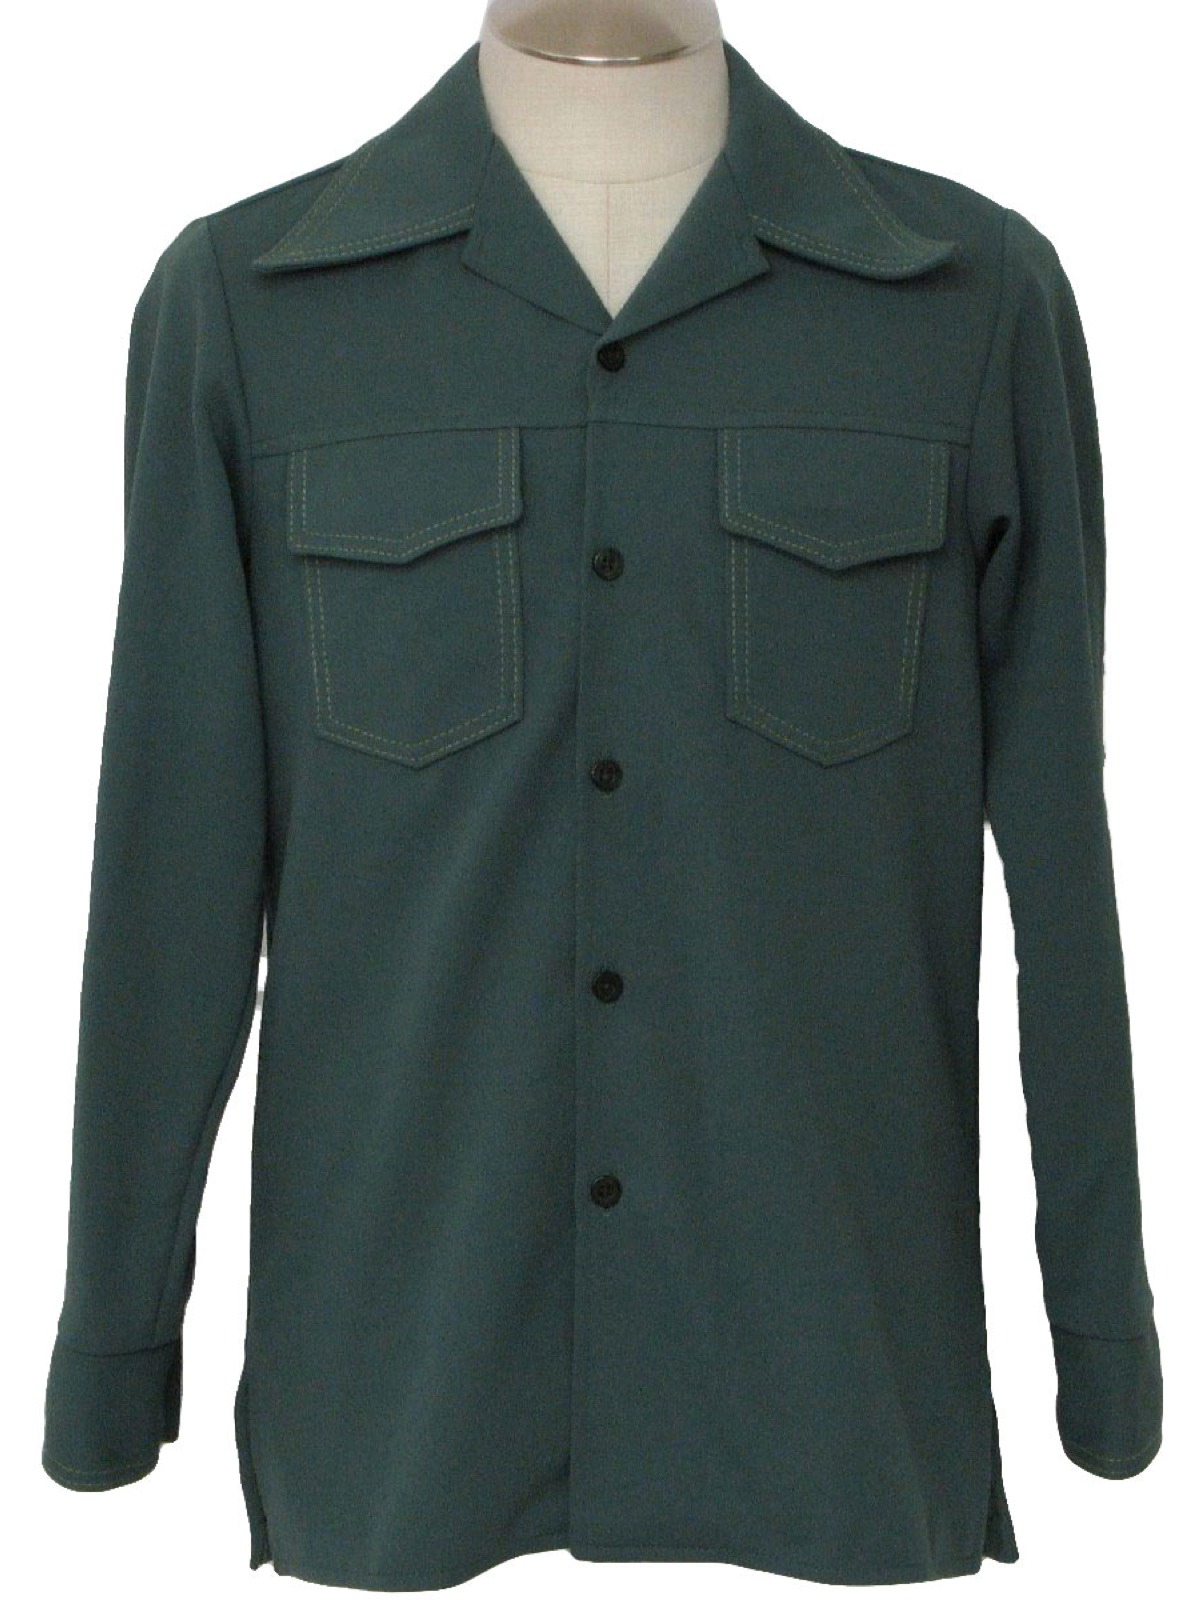 Retro 1970's Jacket (JCPenney) : 70s -JCPenney- Mens green double knit ...